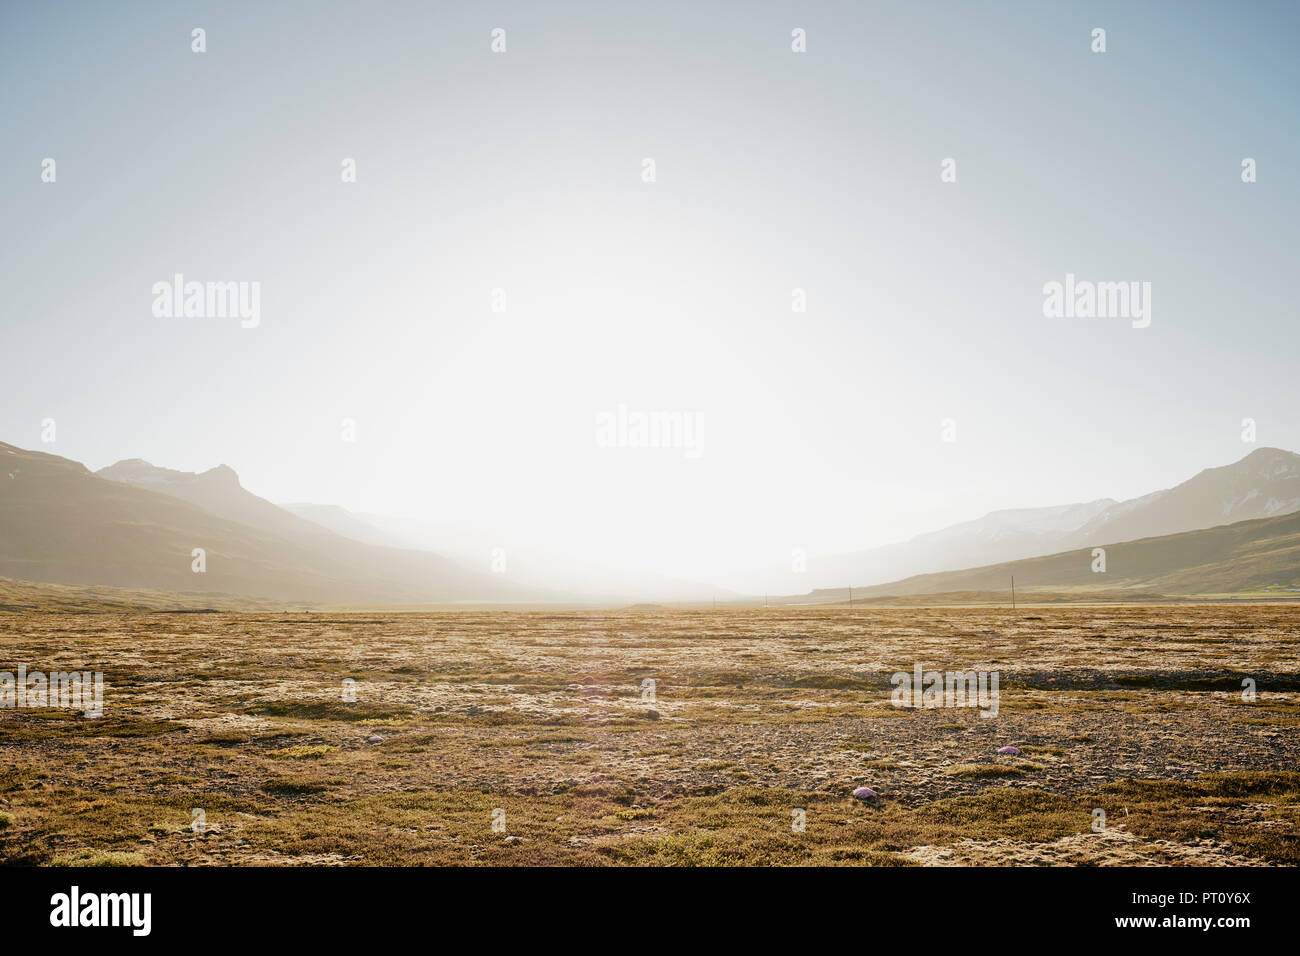 An empty Iceland landscape with mountains and moorland back lit by bright sunlight in a clear sky with copyspace - Iceland minimalism Stock Photo